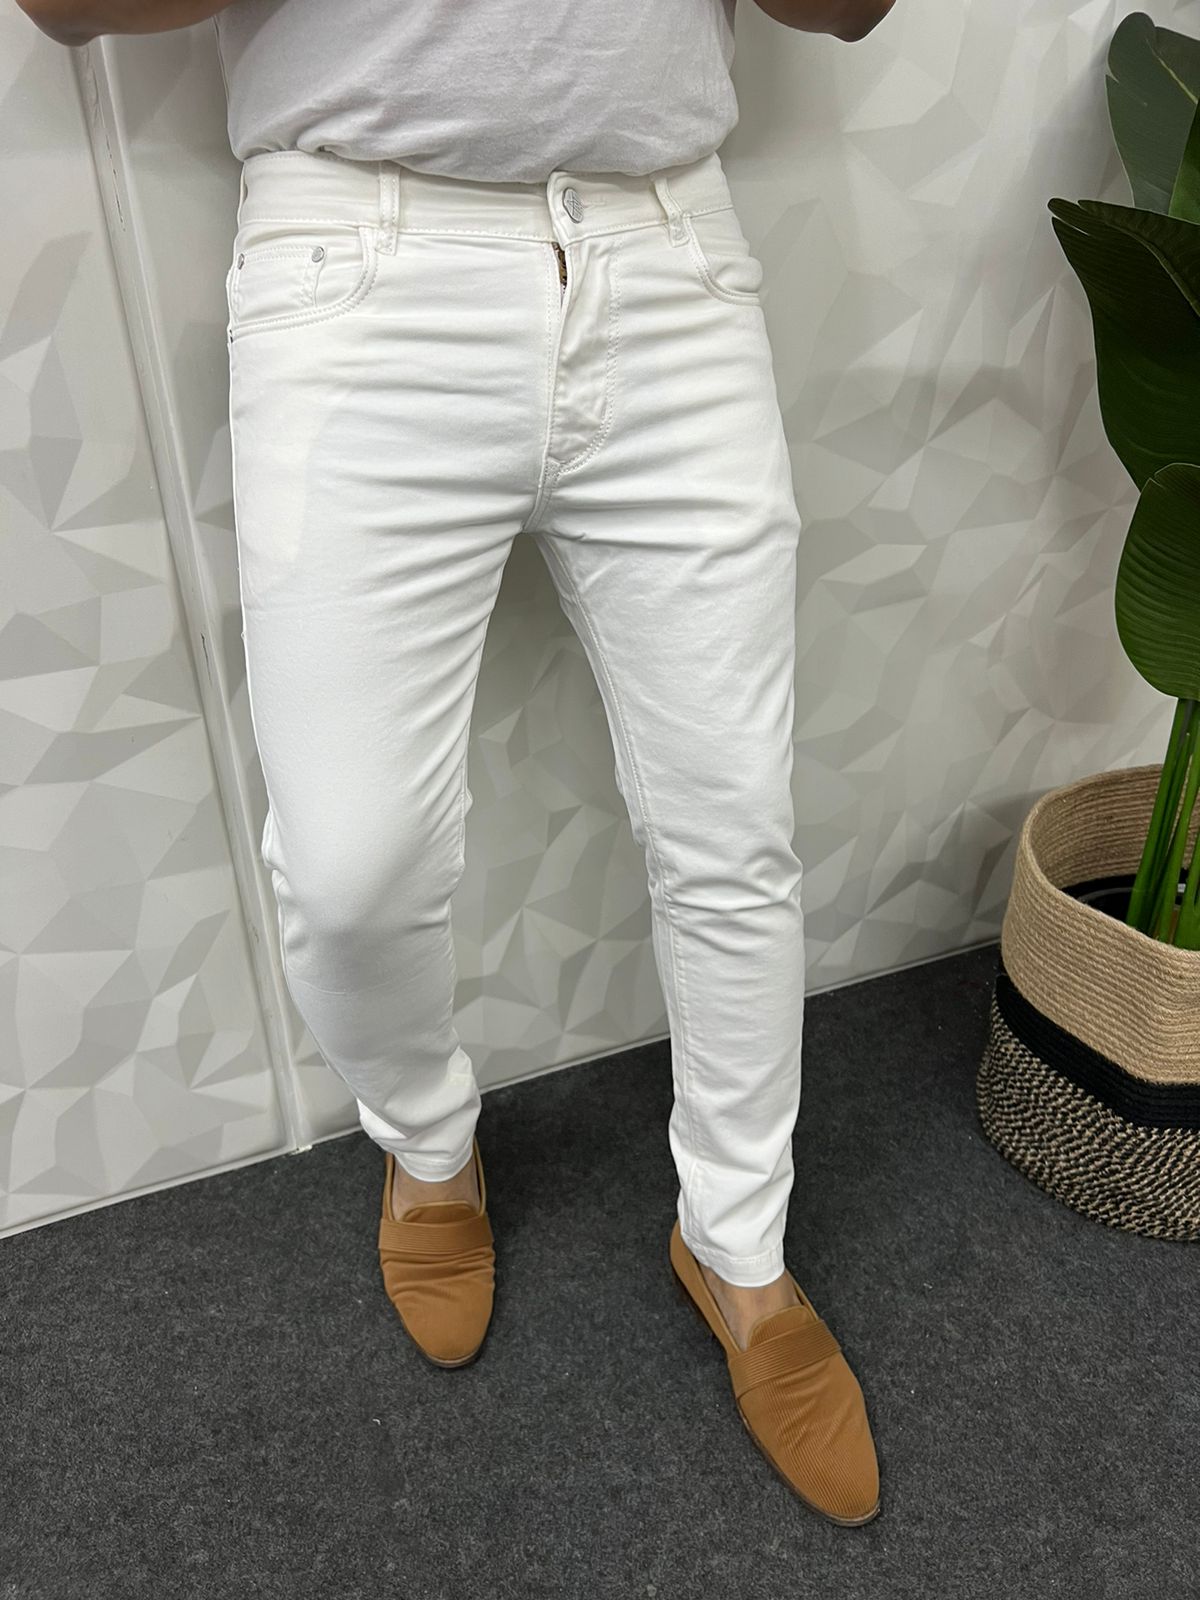 Ankle length white jeans